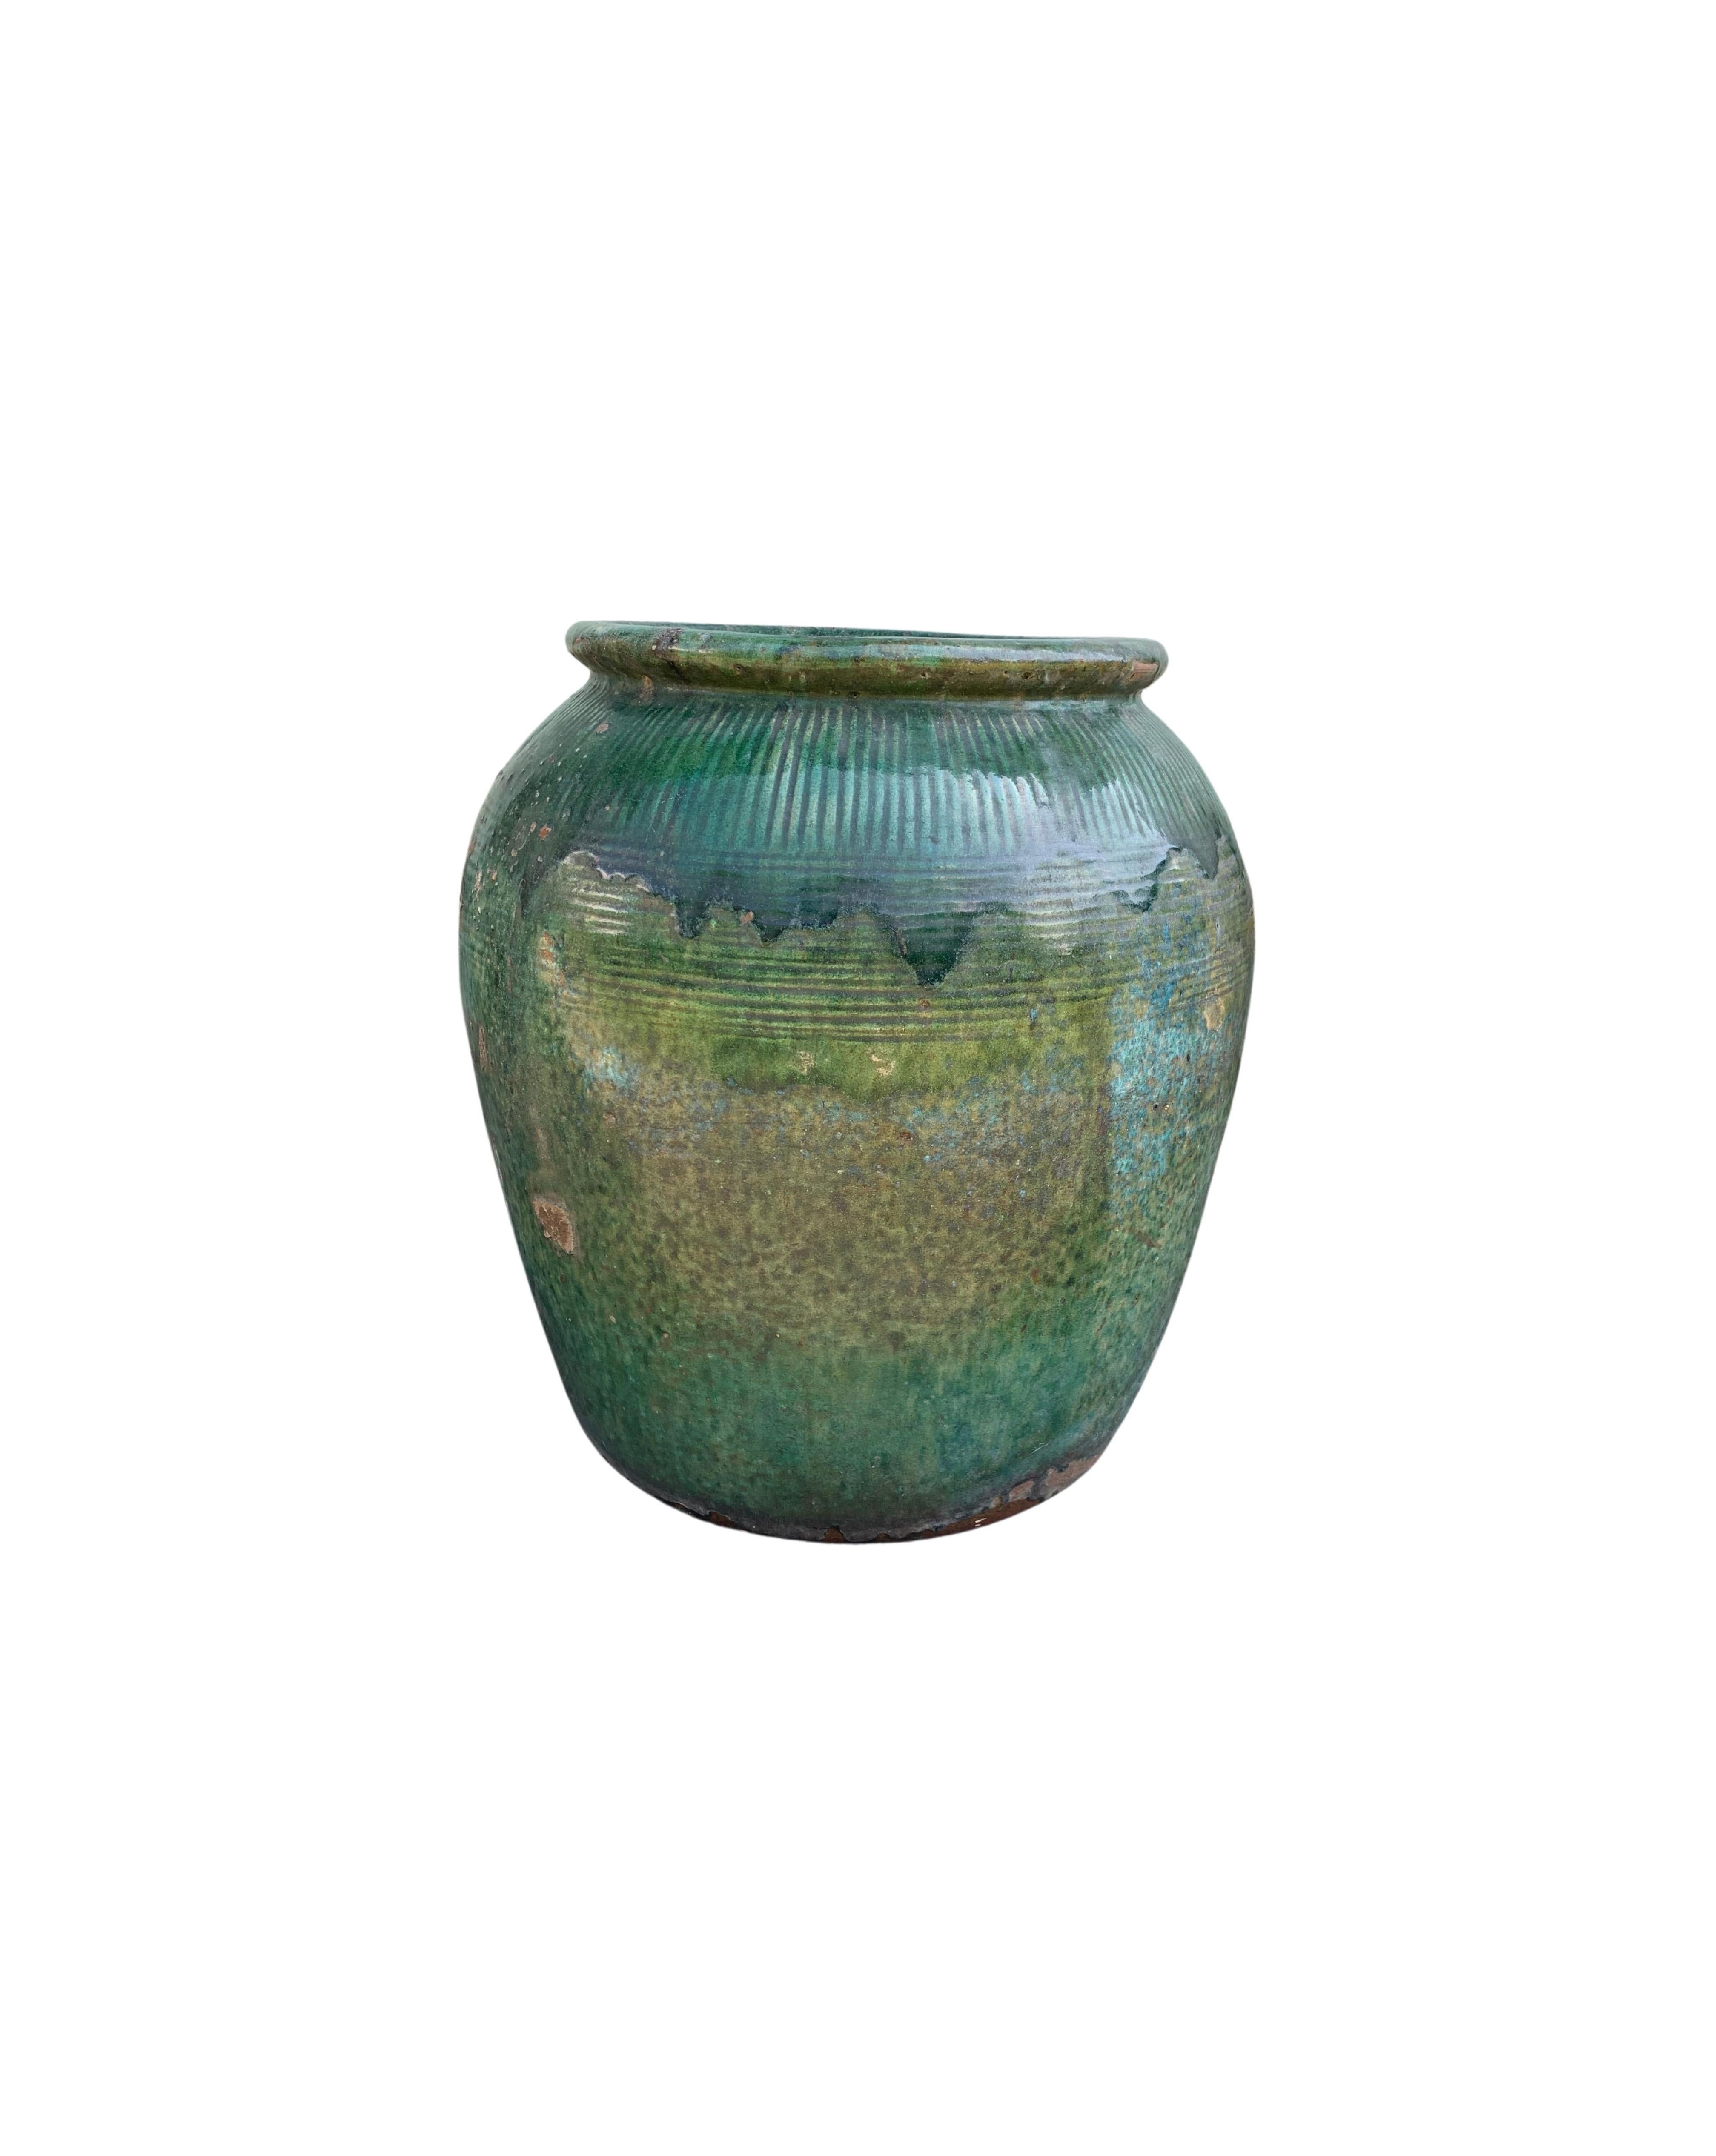 Antique Chinese Green Glazed Ceramic Soy Sauce Jar, c. 1900 In Good Condition For Sale In Jimbaran, Bali